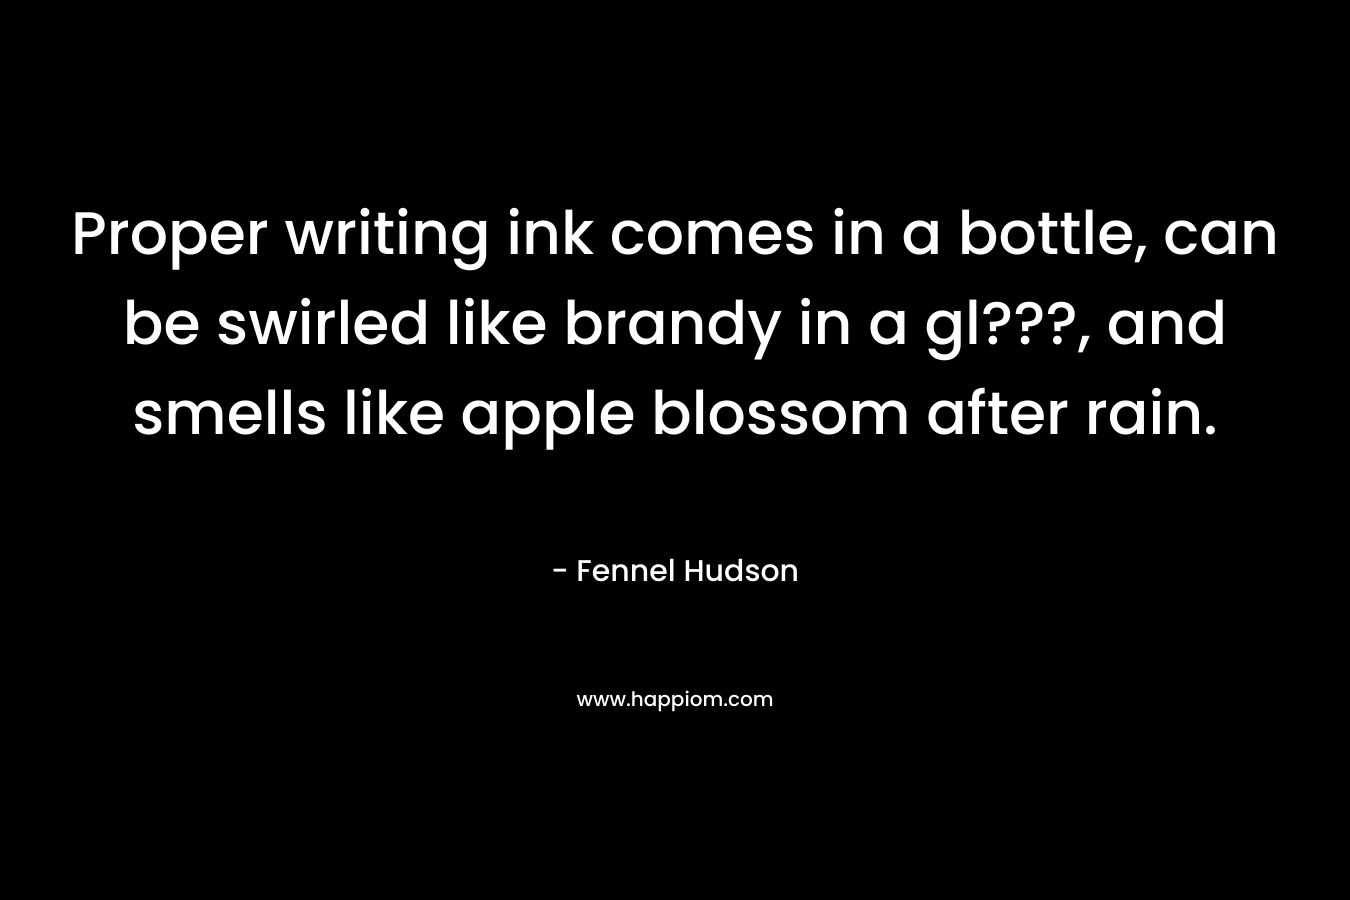 Proper writing ink comes in a bottle, can be swirled like brandy in a gl???, and smells like apple blossom after rain. – Fennel Hudson